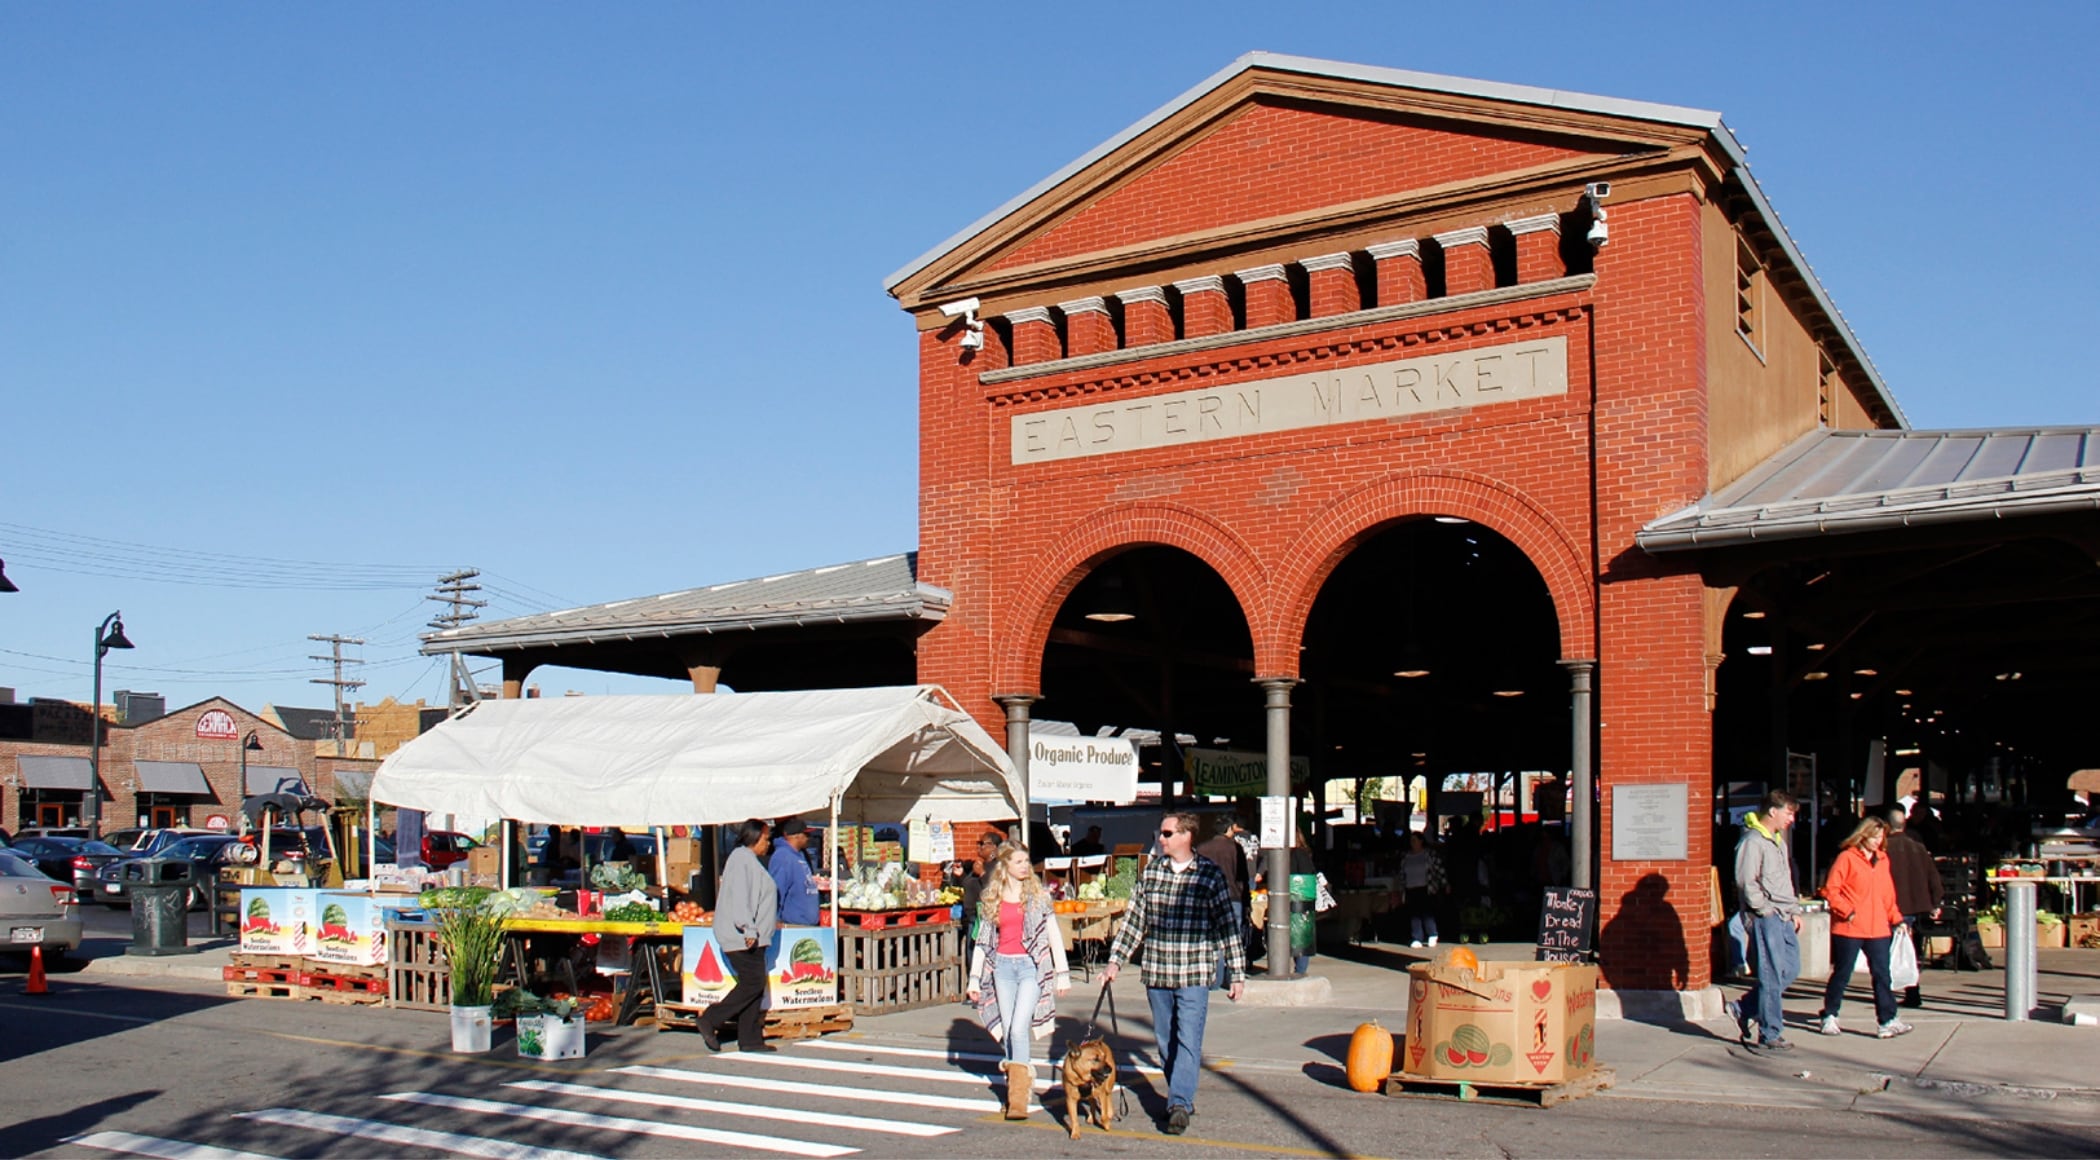 Easter Market's iconic red brick shed with arched entryway. In front of it sits a white tent full of vegetables and several people browsing.